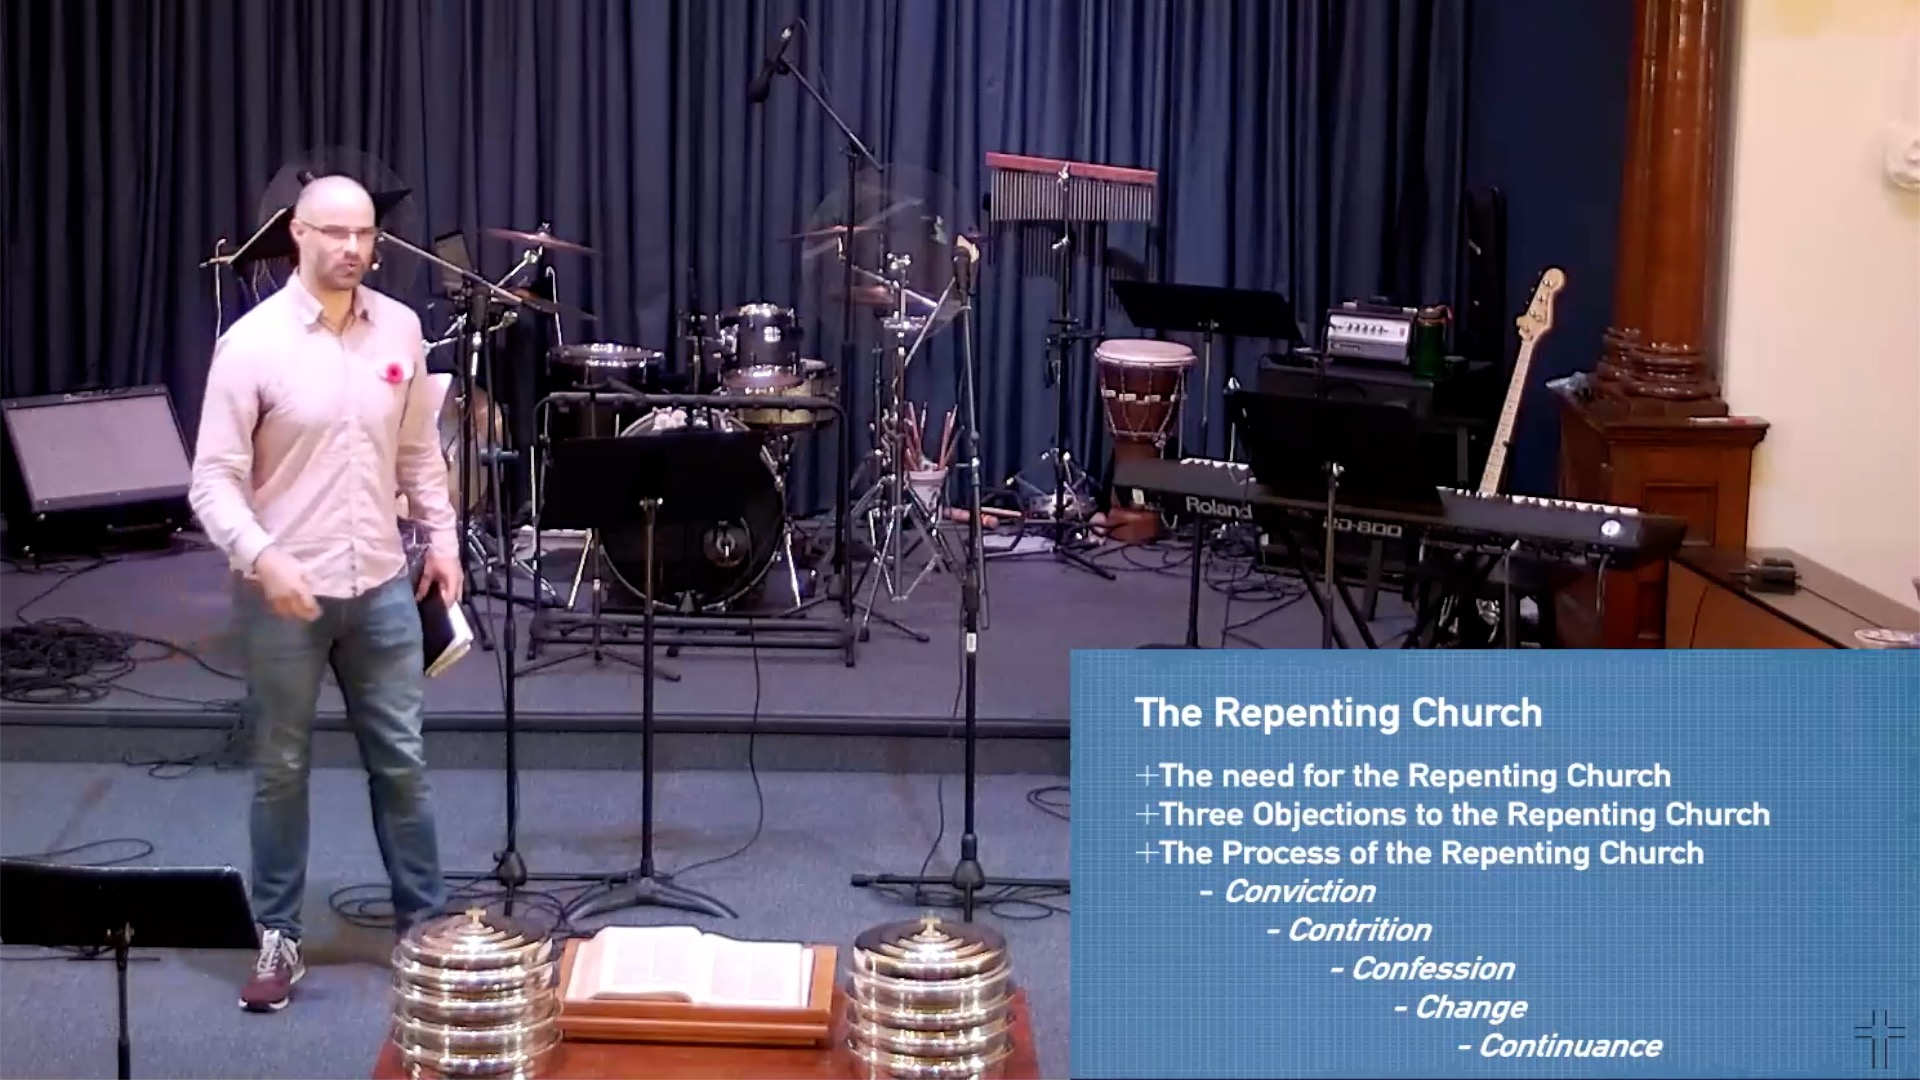 The Repenting Church